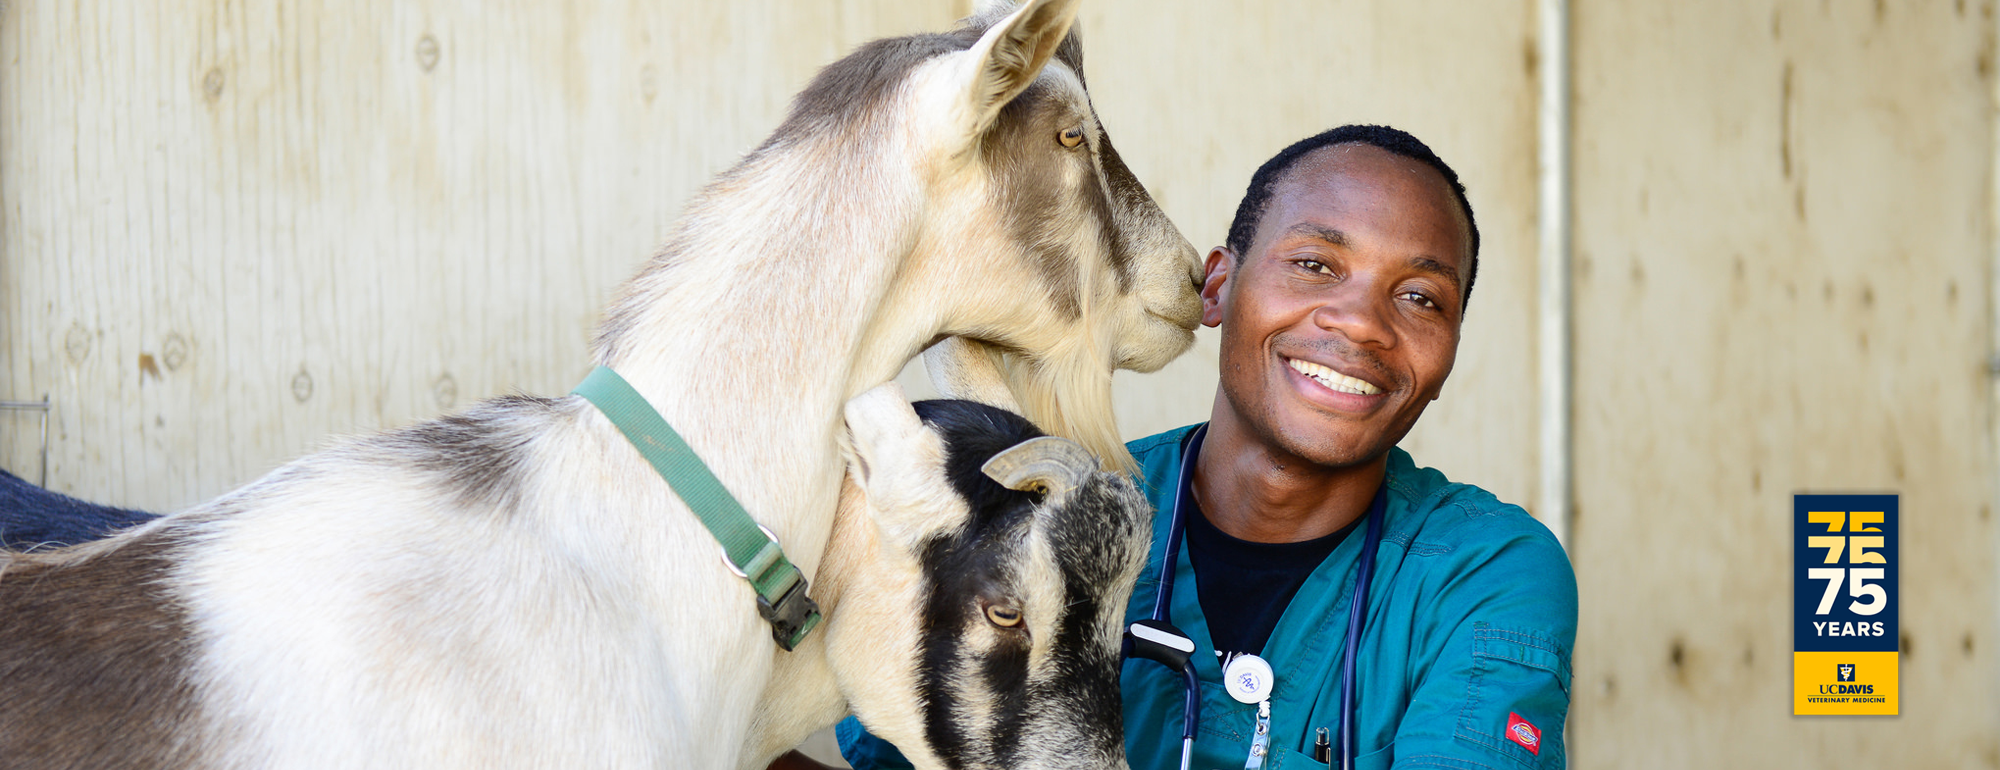 Vet with goats